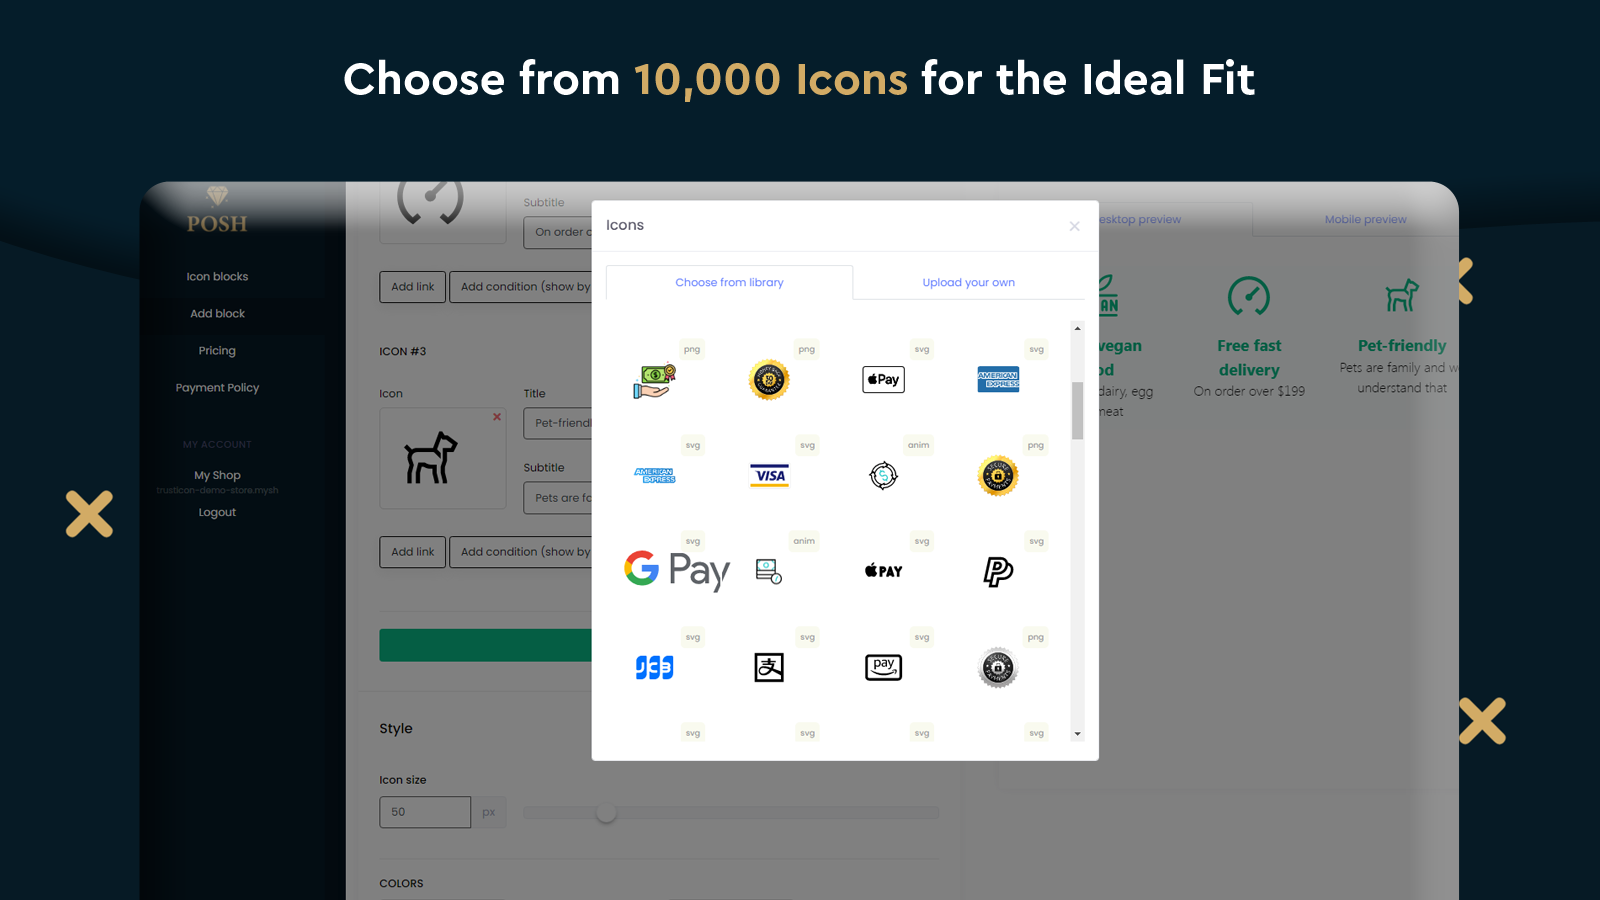 Choose from 10,000 Icons for the Ideal Fit